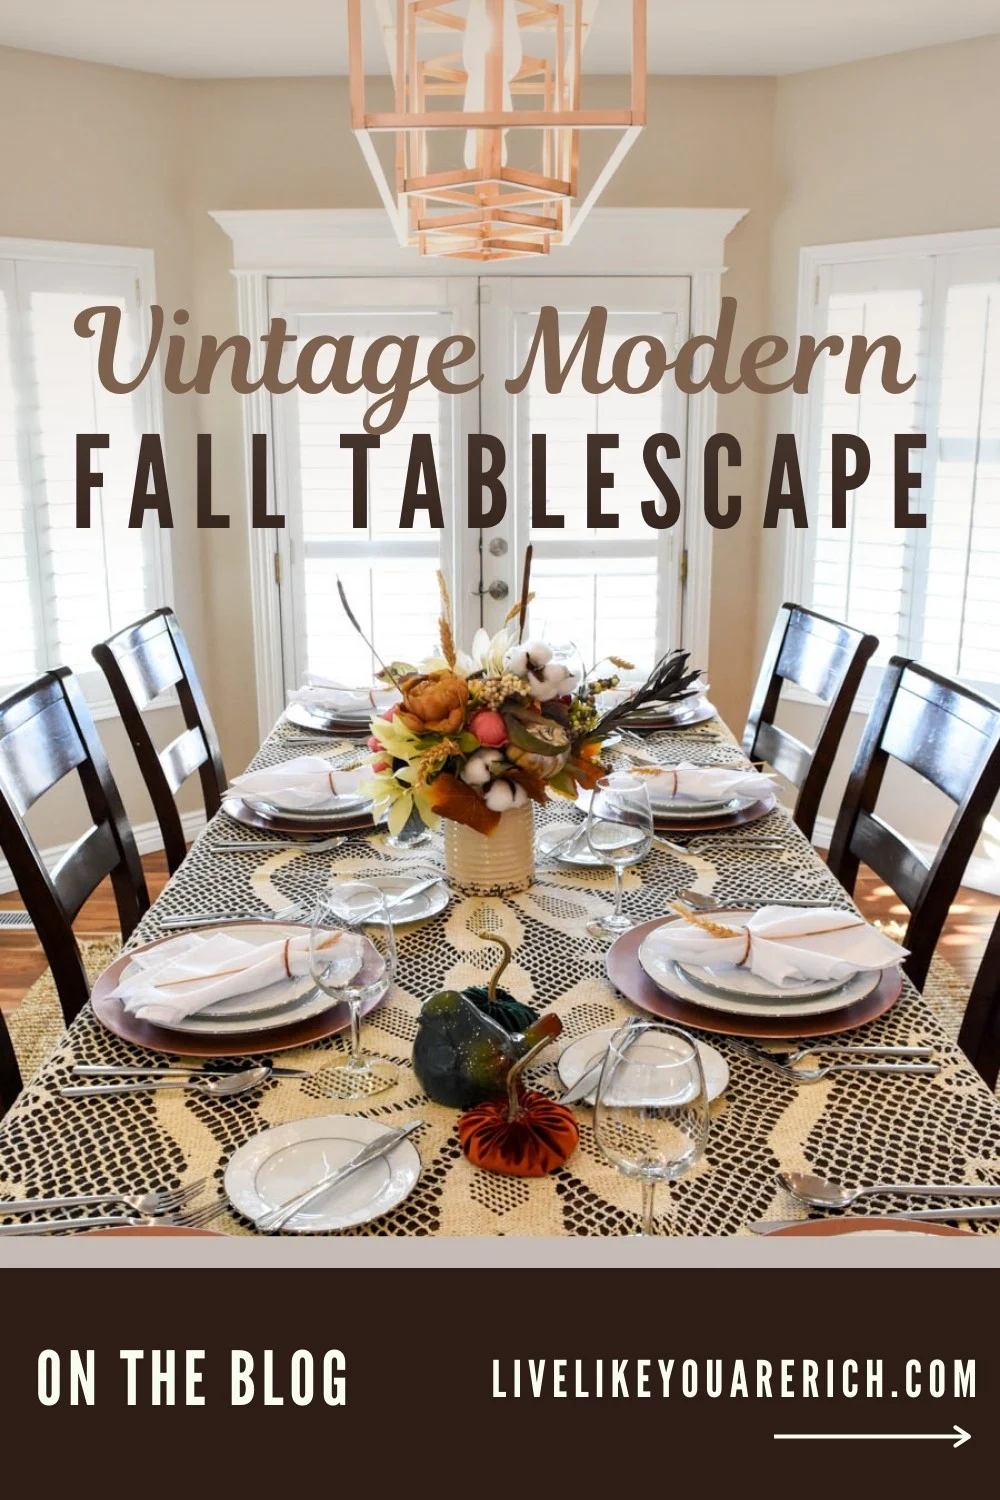 This vintage modern fall tablescape is a combination of a style of decorating when one mixes and decorates with old style and new style items. Together they create a fun and unique look that is called vintage modern.